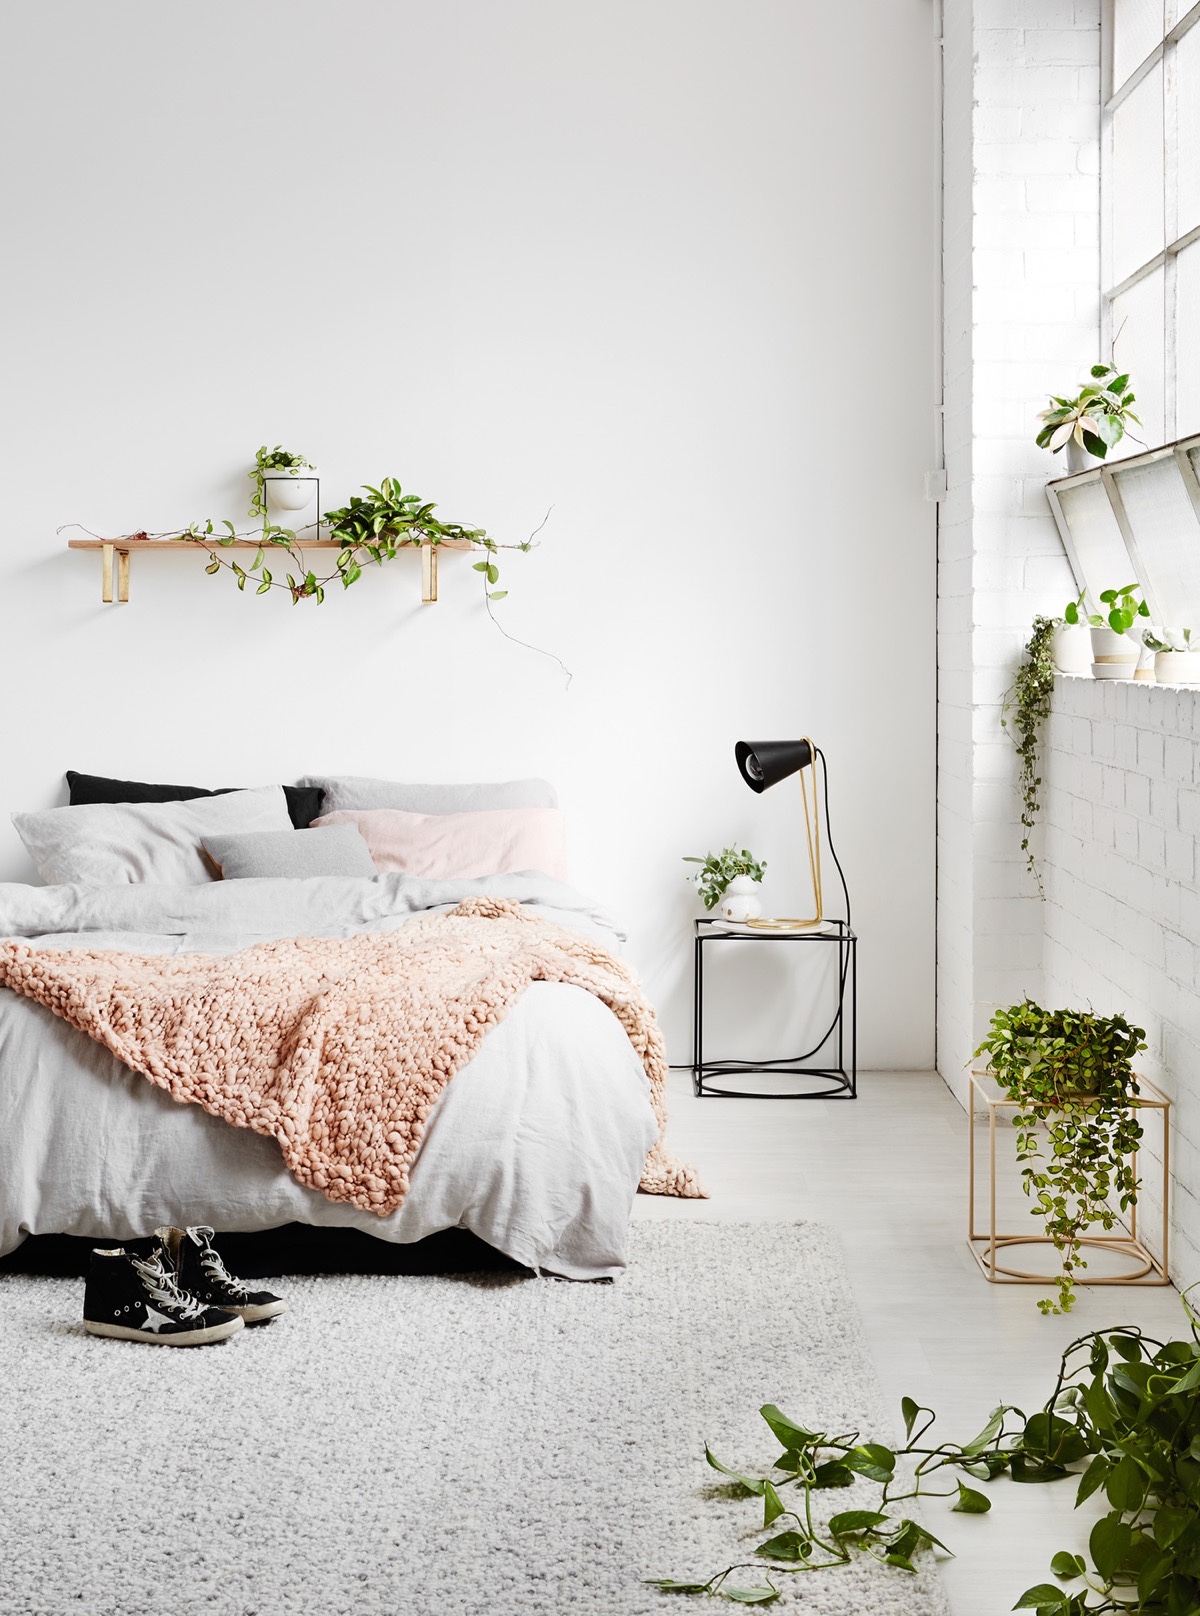 51 Boho Bedrooms With Ideas, Tips And Accessories To Help You